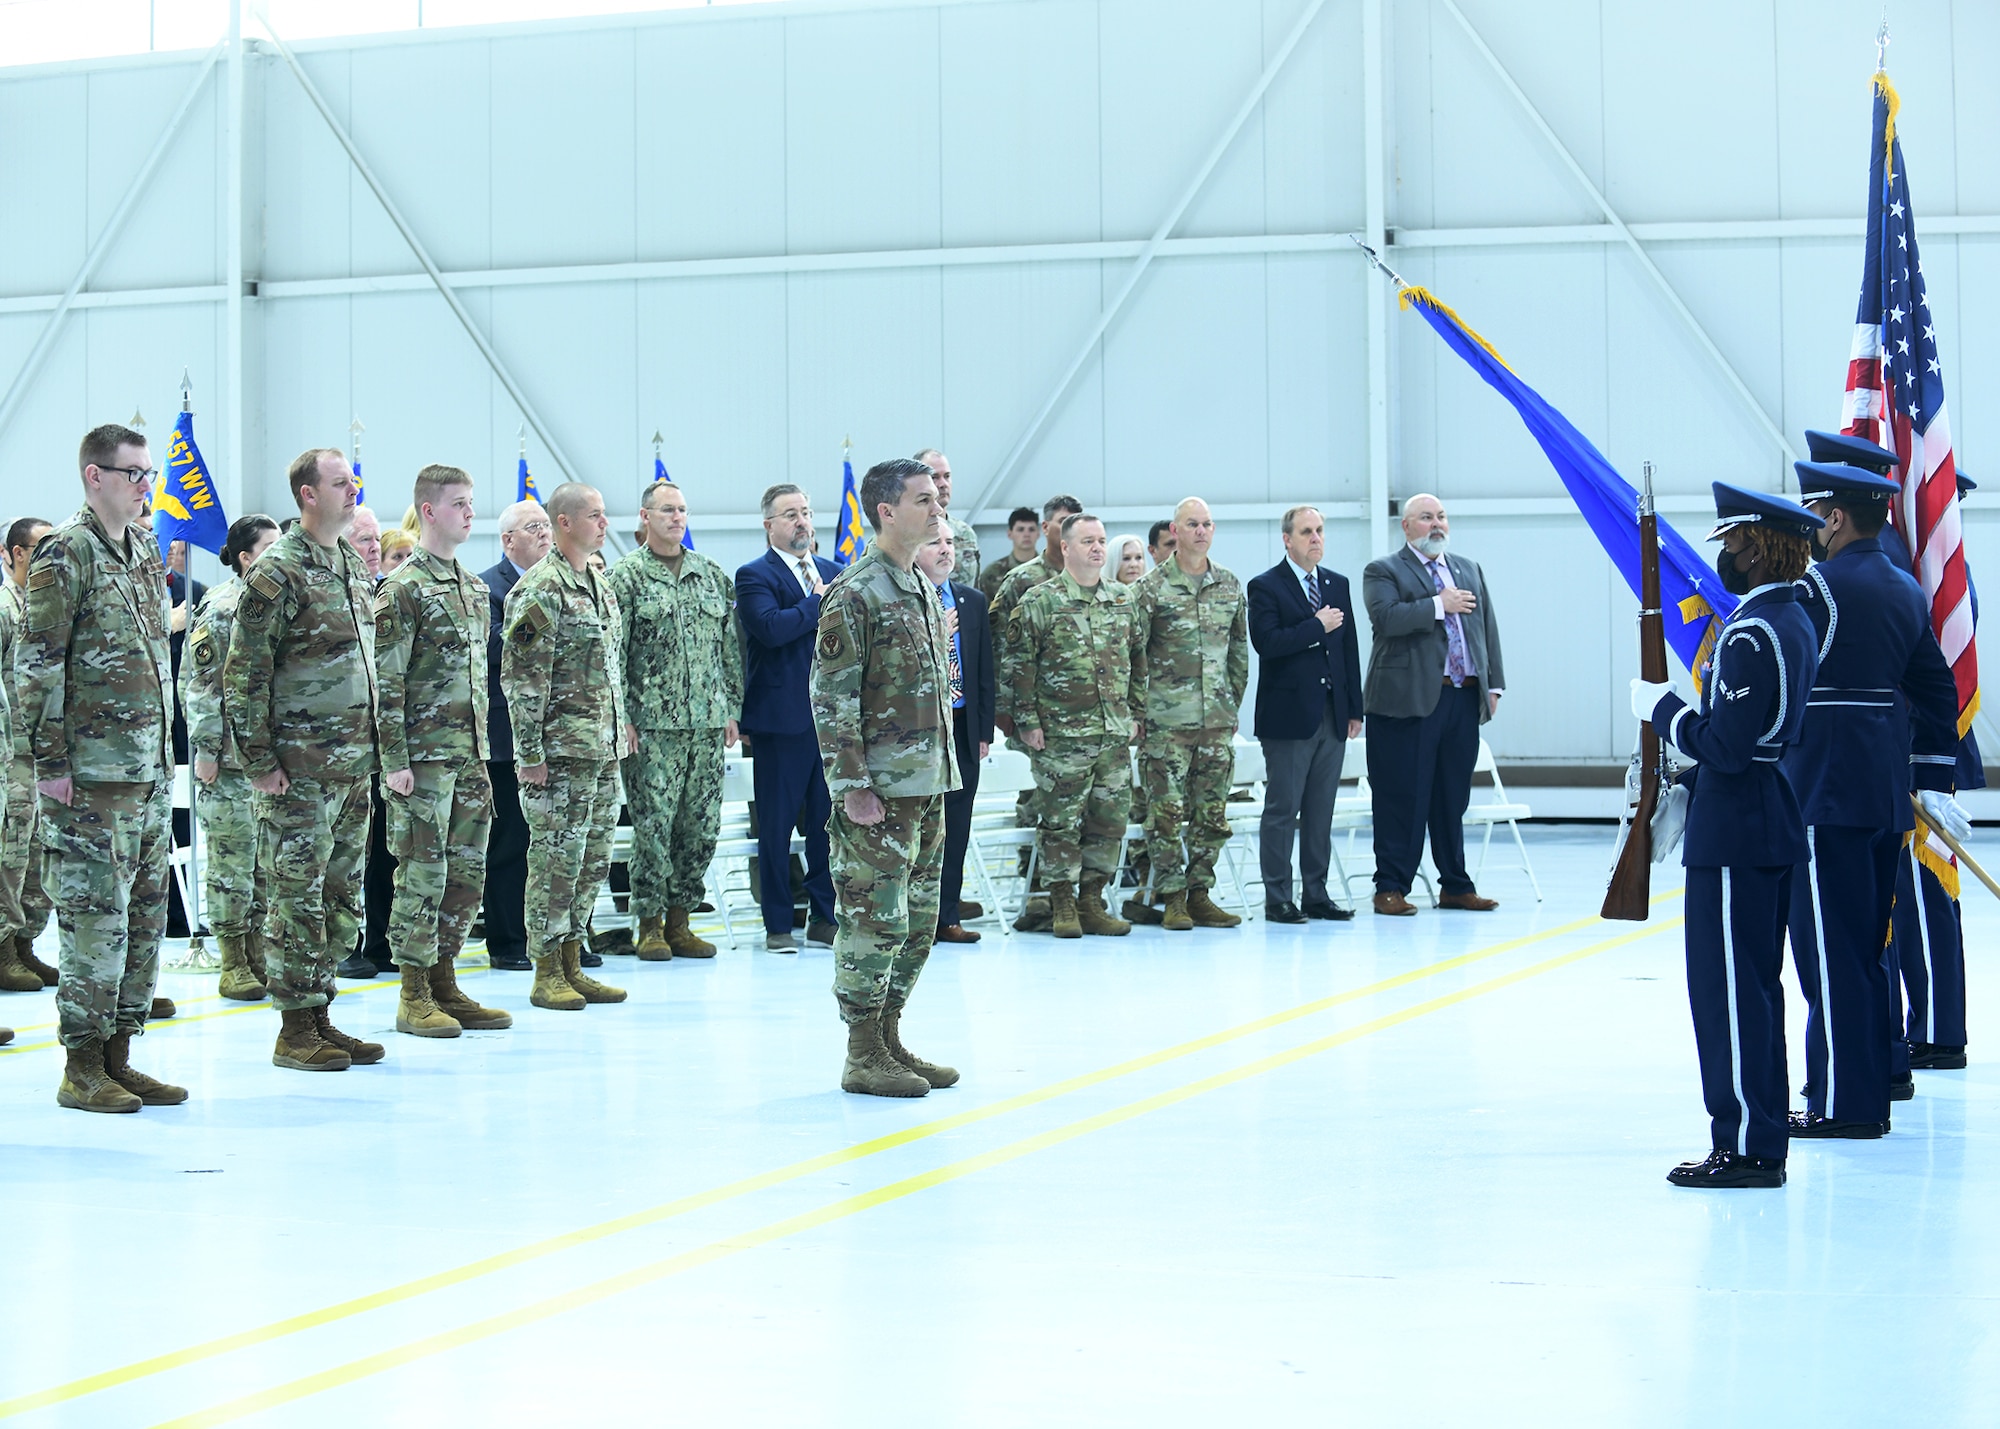 The colors are being presented at the 557th Weather Wing Change of Command ceremony on May 24, 2022 in hangar six on Offutt AFB.